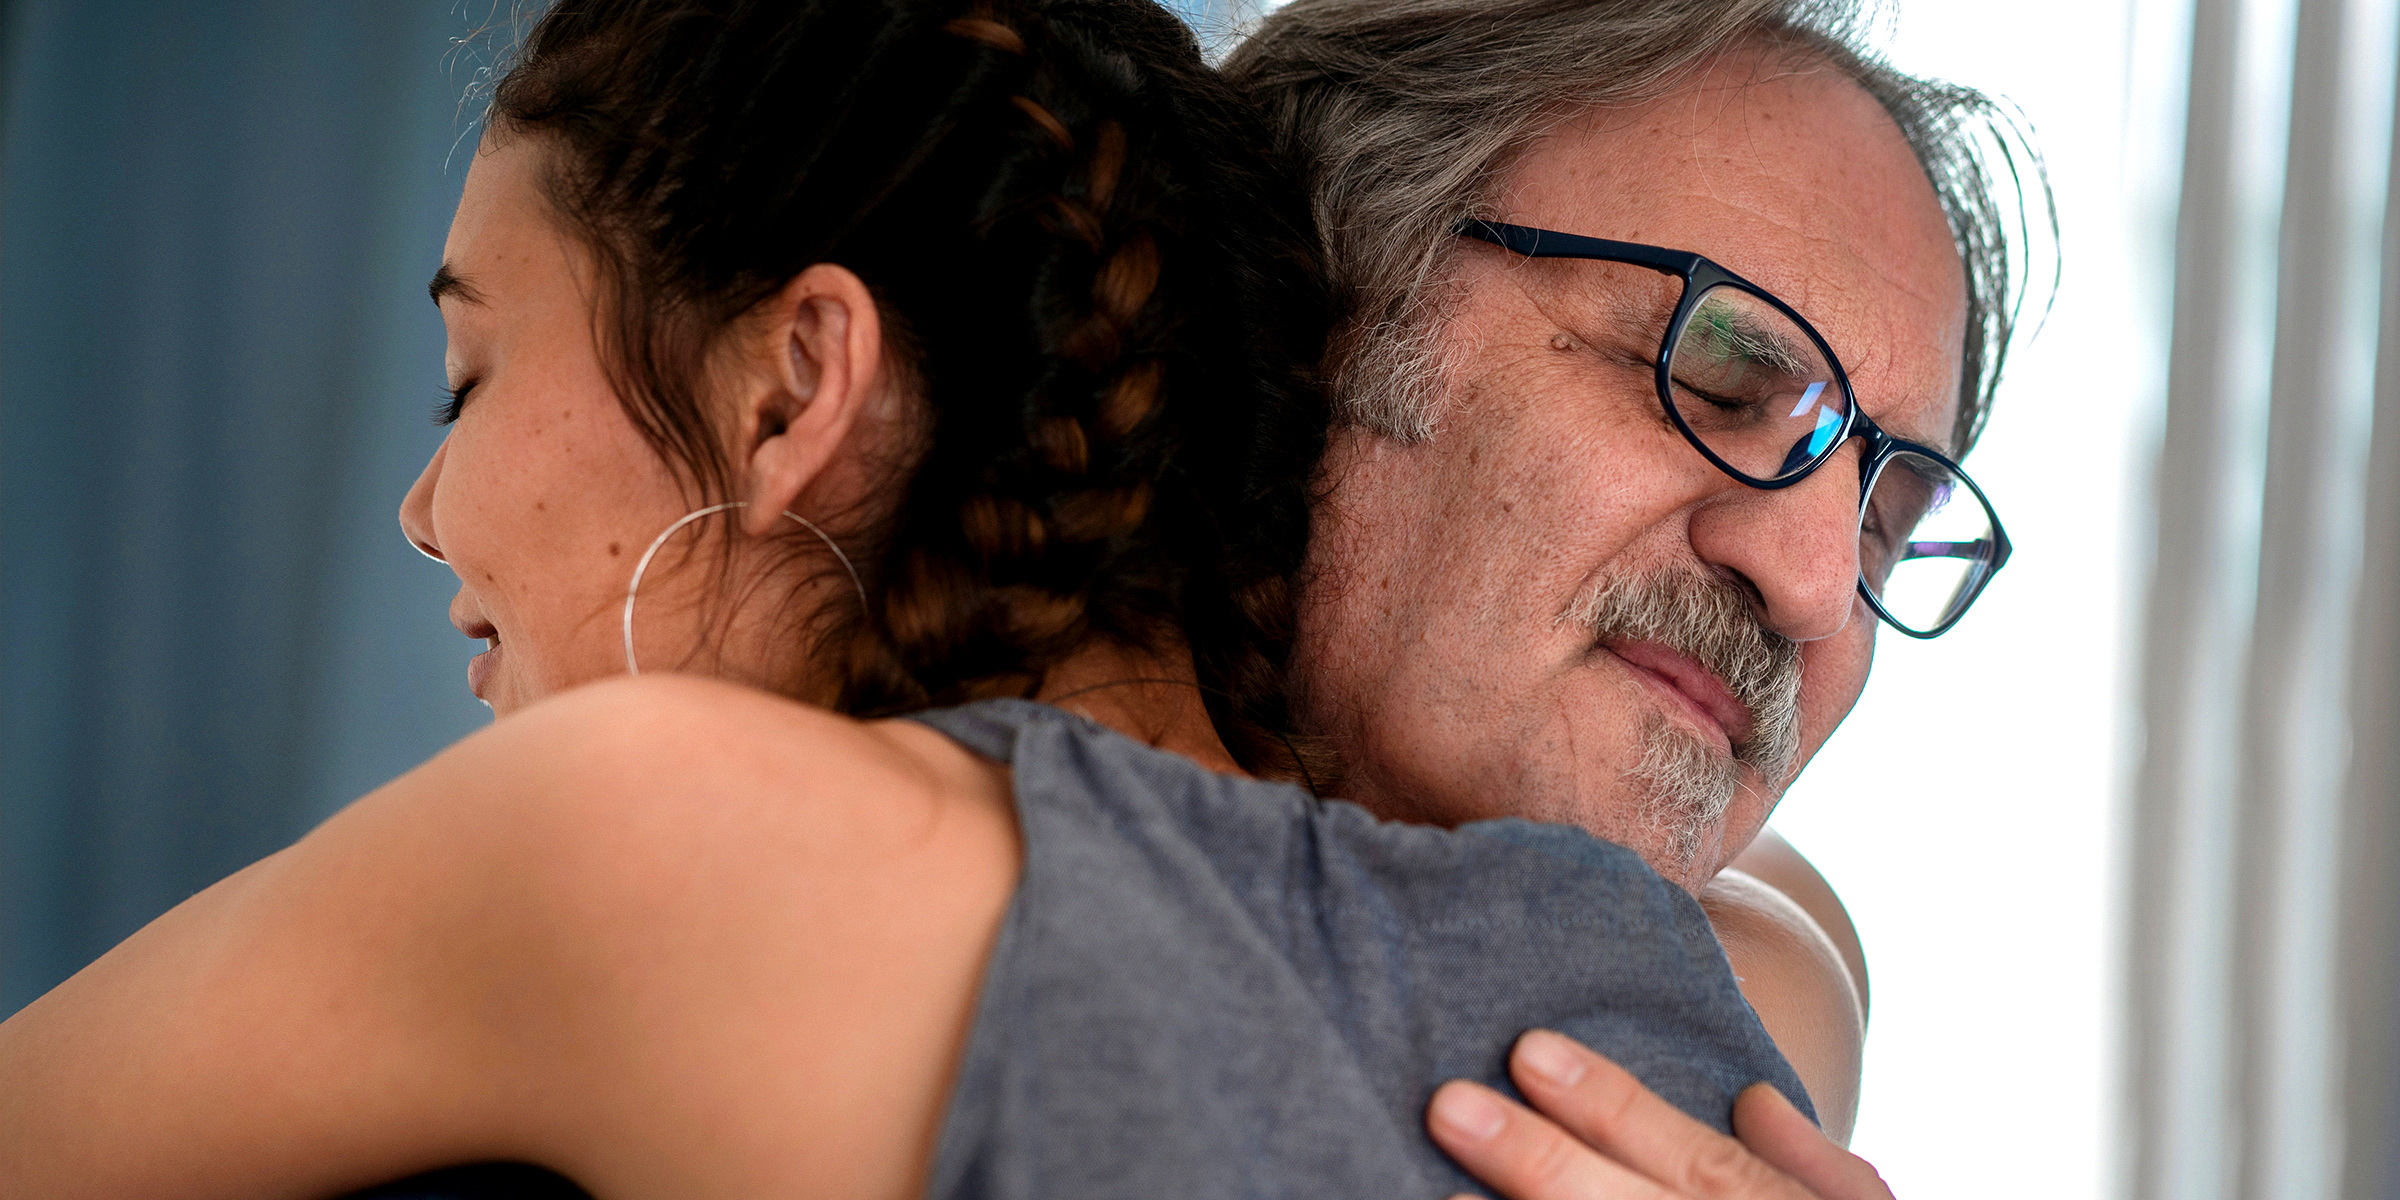 A father and daughter hugging | Source: Shutterstock